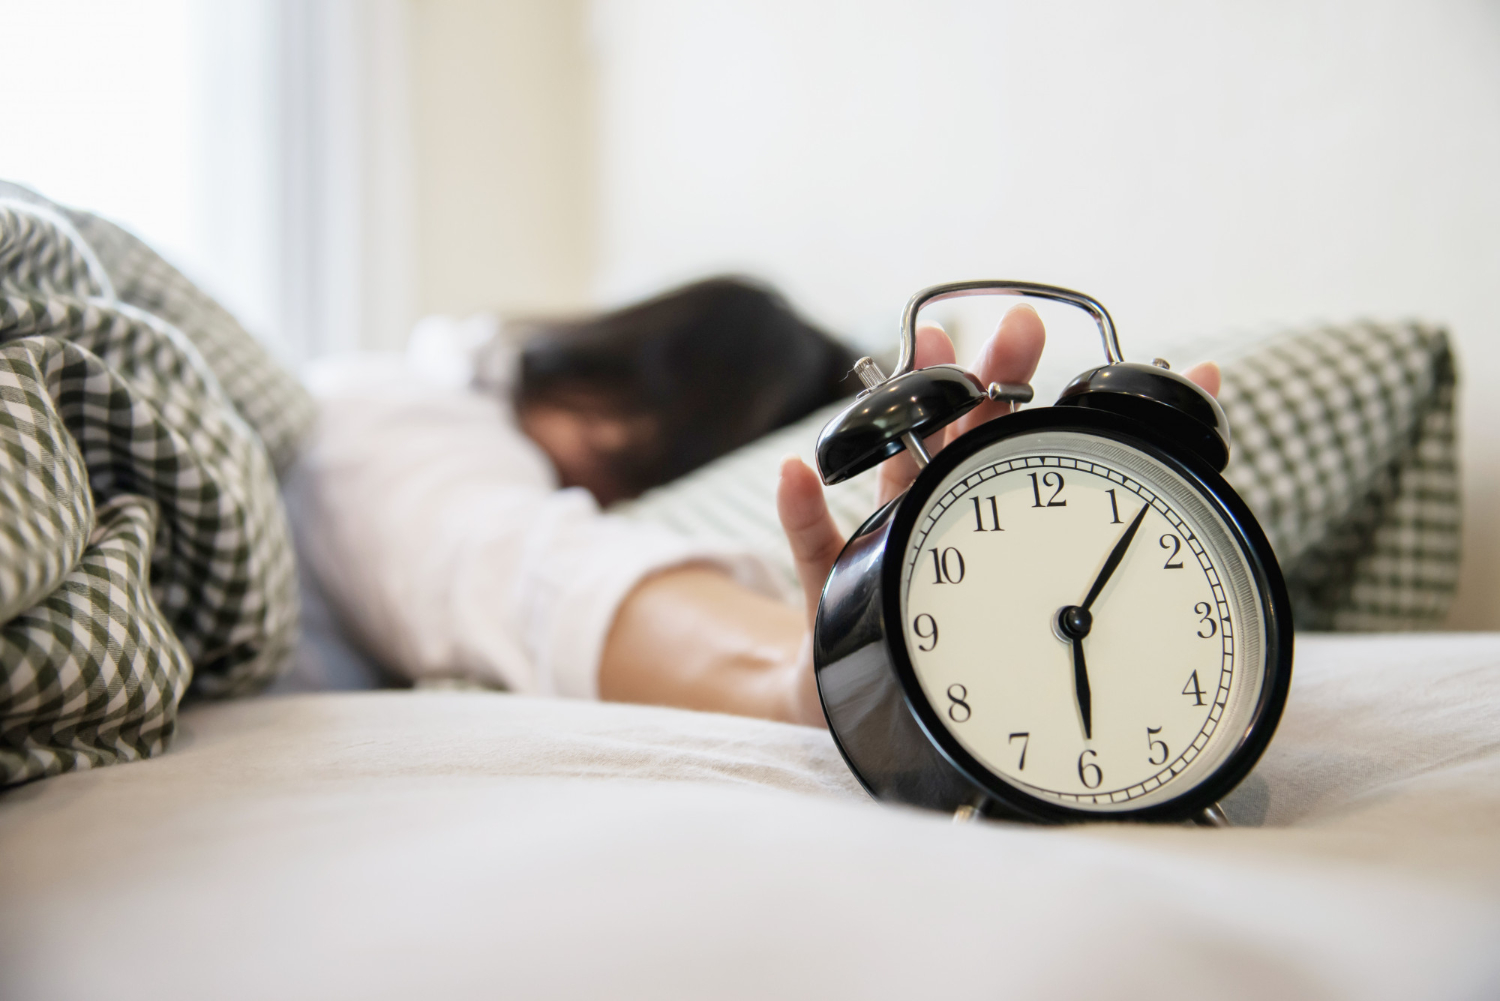 The importance of sleep to maximize the benefits of exercise and cognitive health